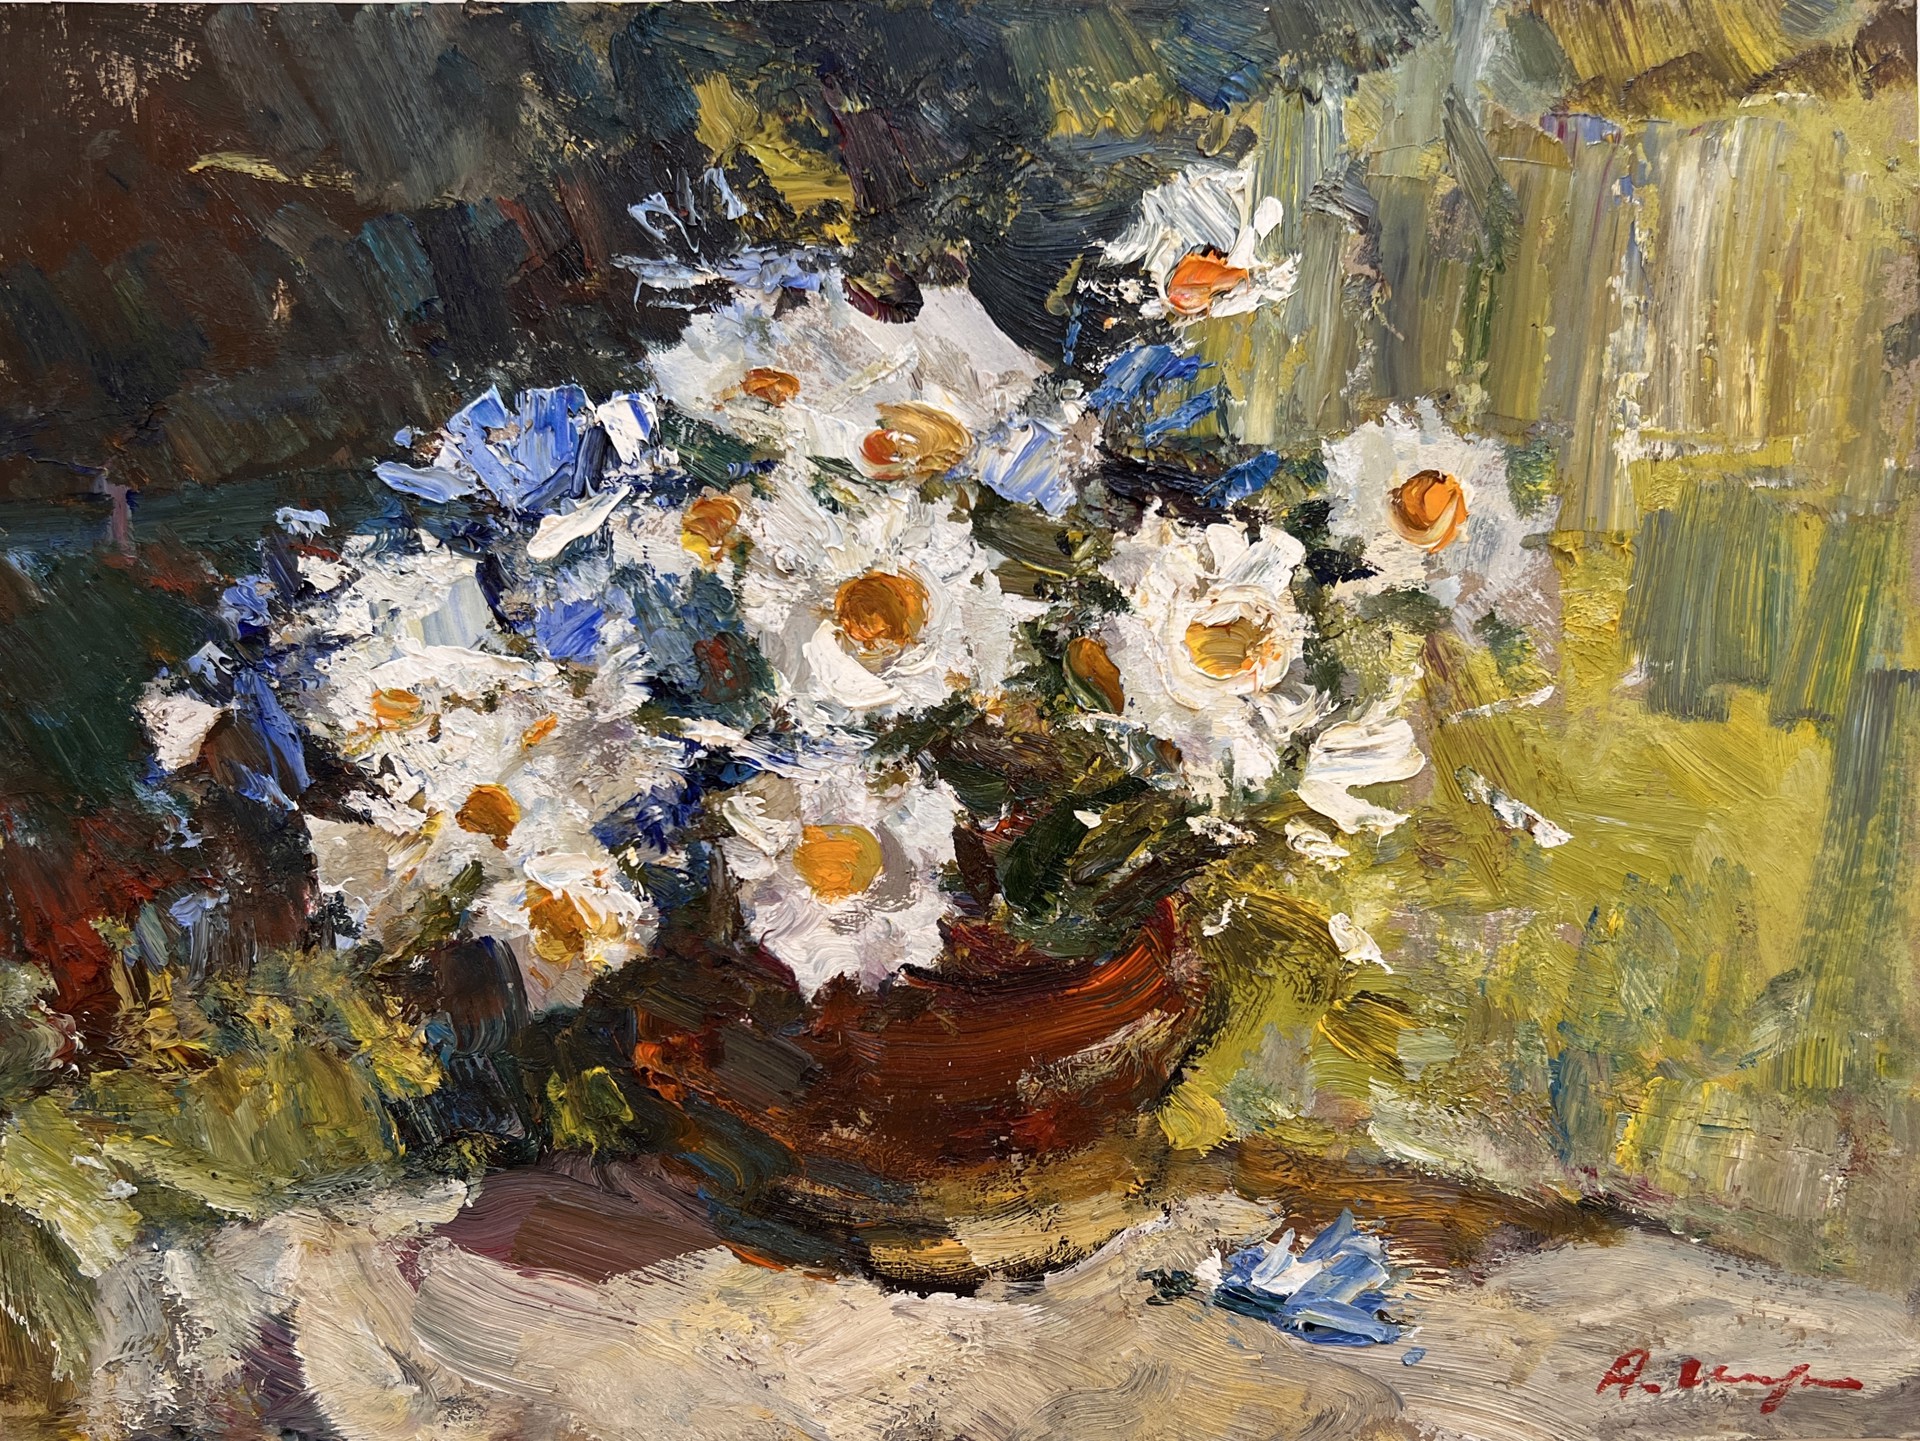 "Chamomile" original oil painting by Andrey Inozemtsev